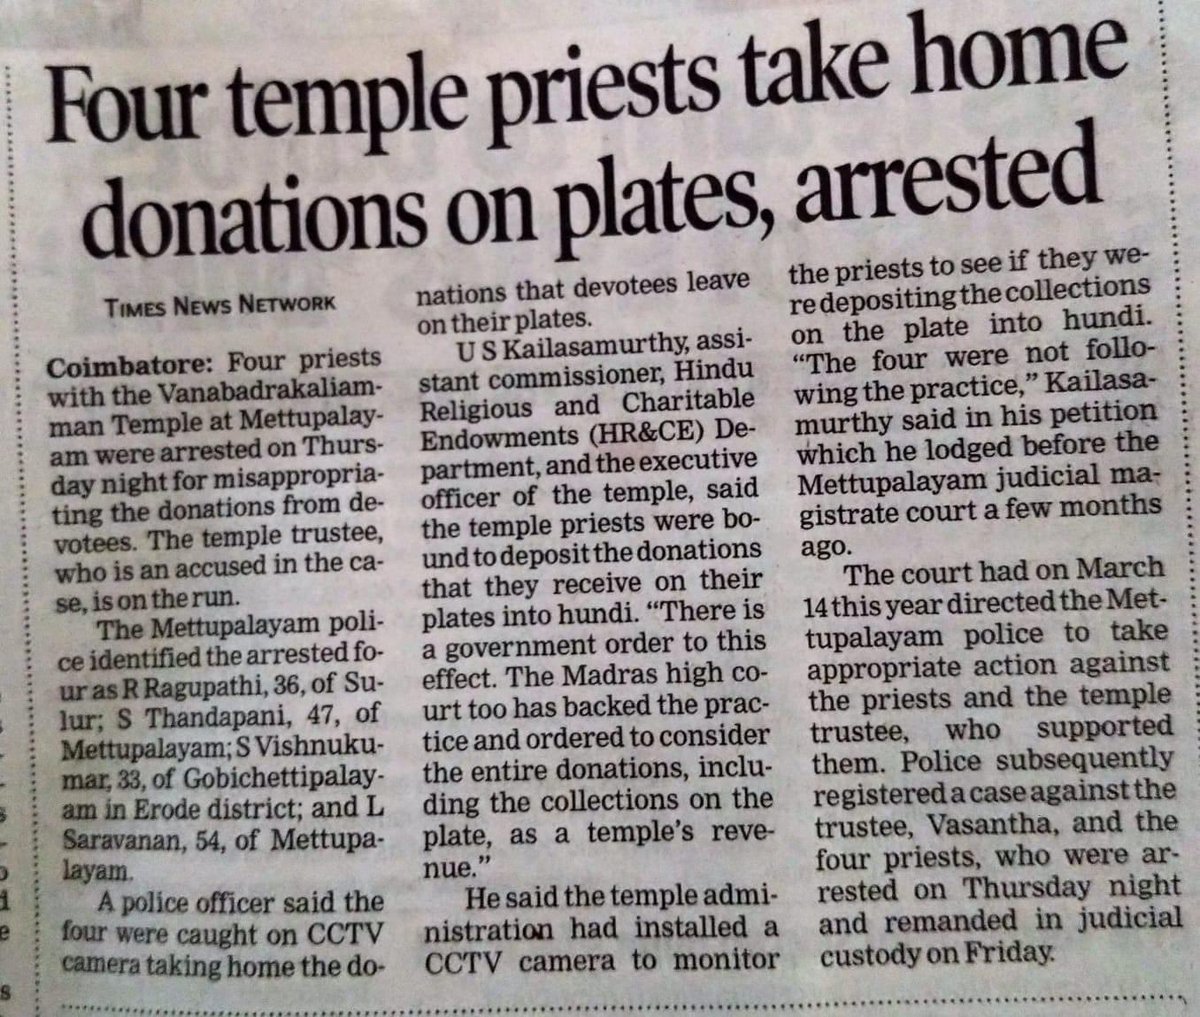 This is how the ricebag DMK wants  to starve Hindu Priests

Four Hindu mandir priests arrested for taking dakshina given to them in their Aarti Thali (Pooja plate) at Vanabadrakaliamman mandir at Mettupalayam, Coimbatore, Tamil Nadu.

The anti Hindu DMK govt  took everything from…